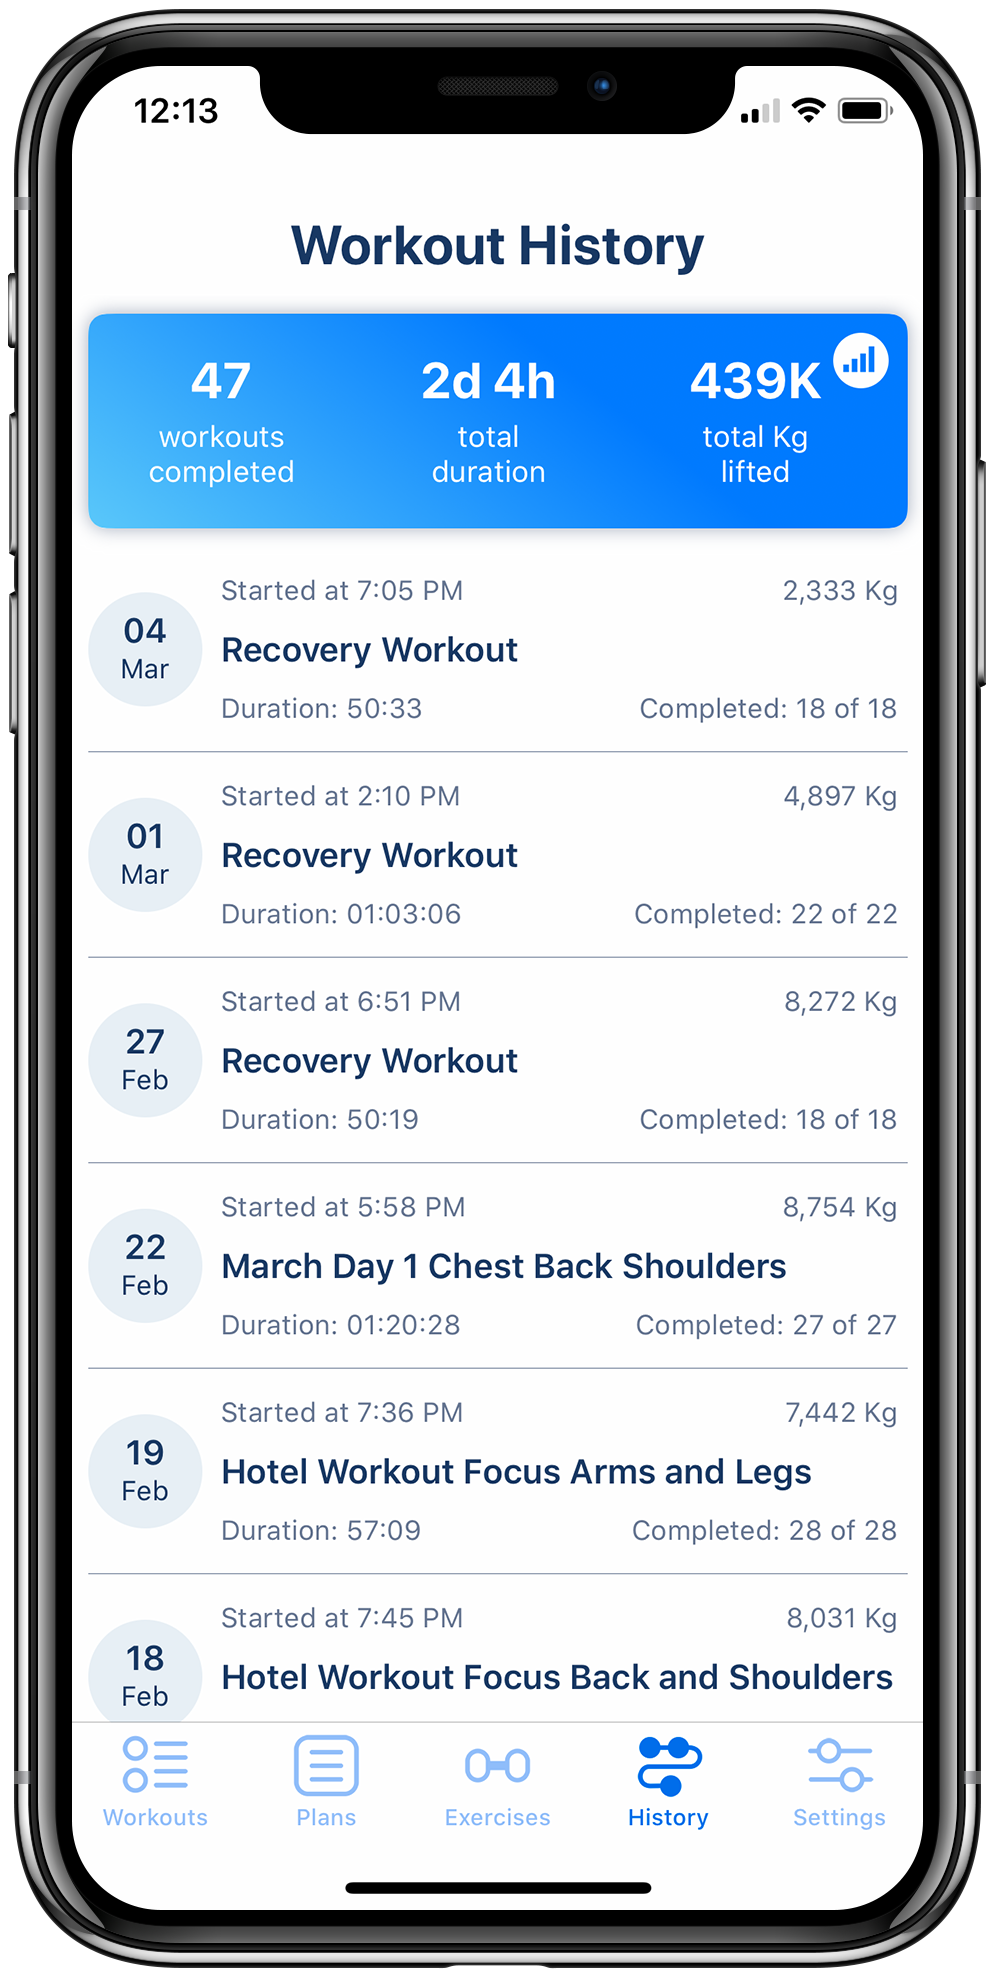 Workout tracker app on iPhone displaying a history of executed workouts